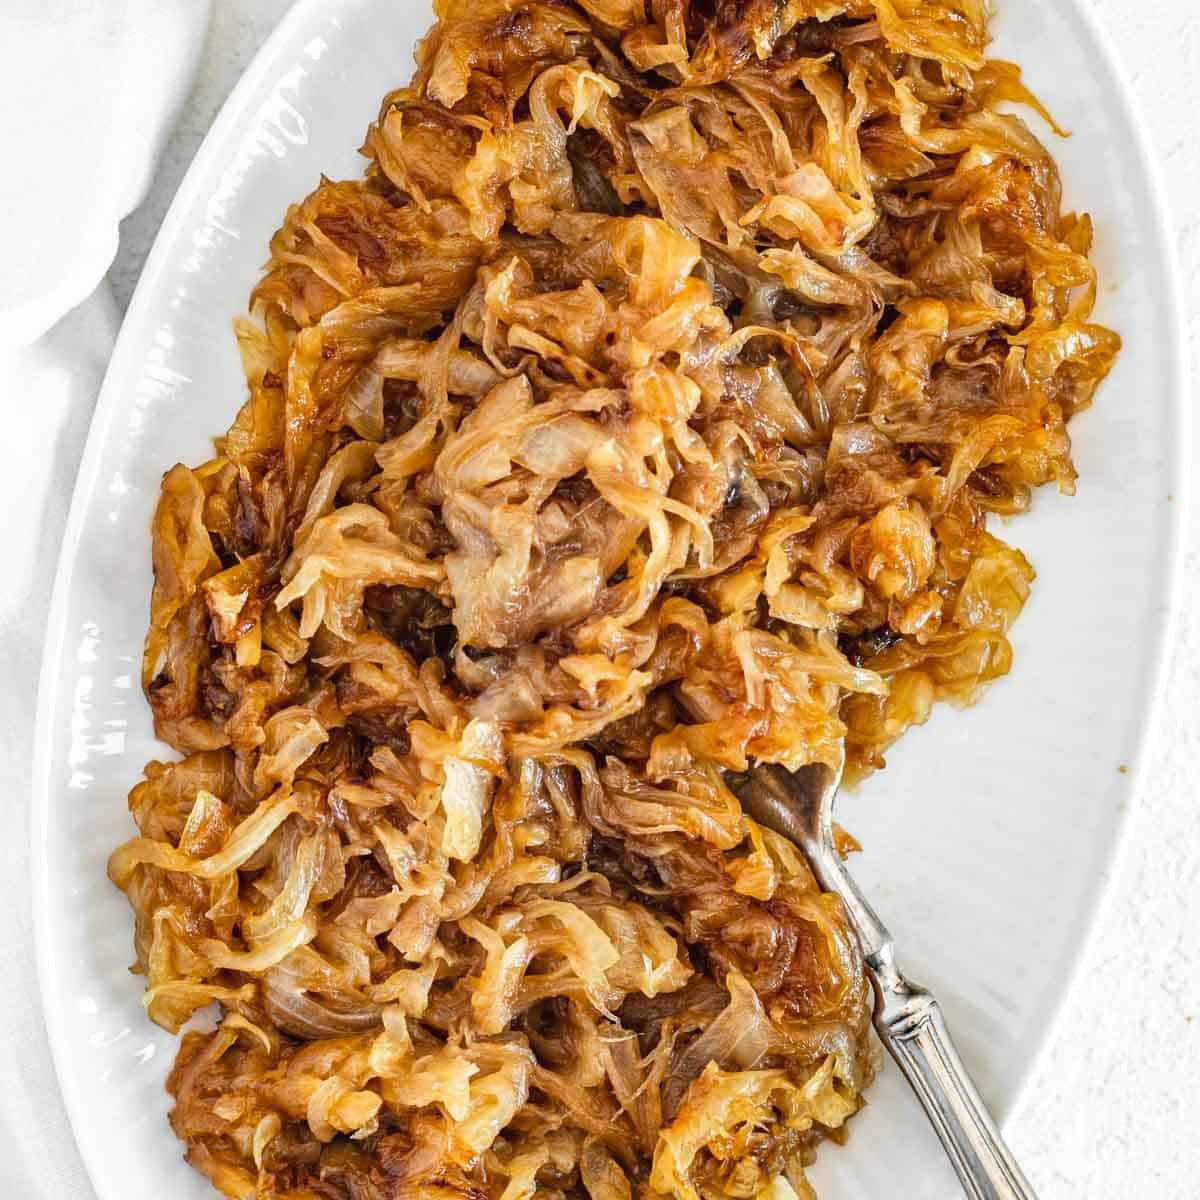 Caramelized onions with a silver fork